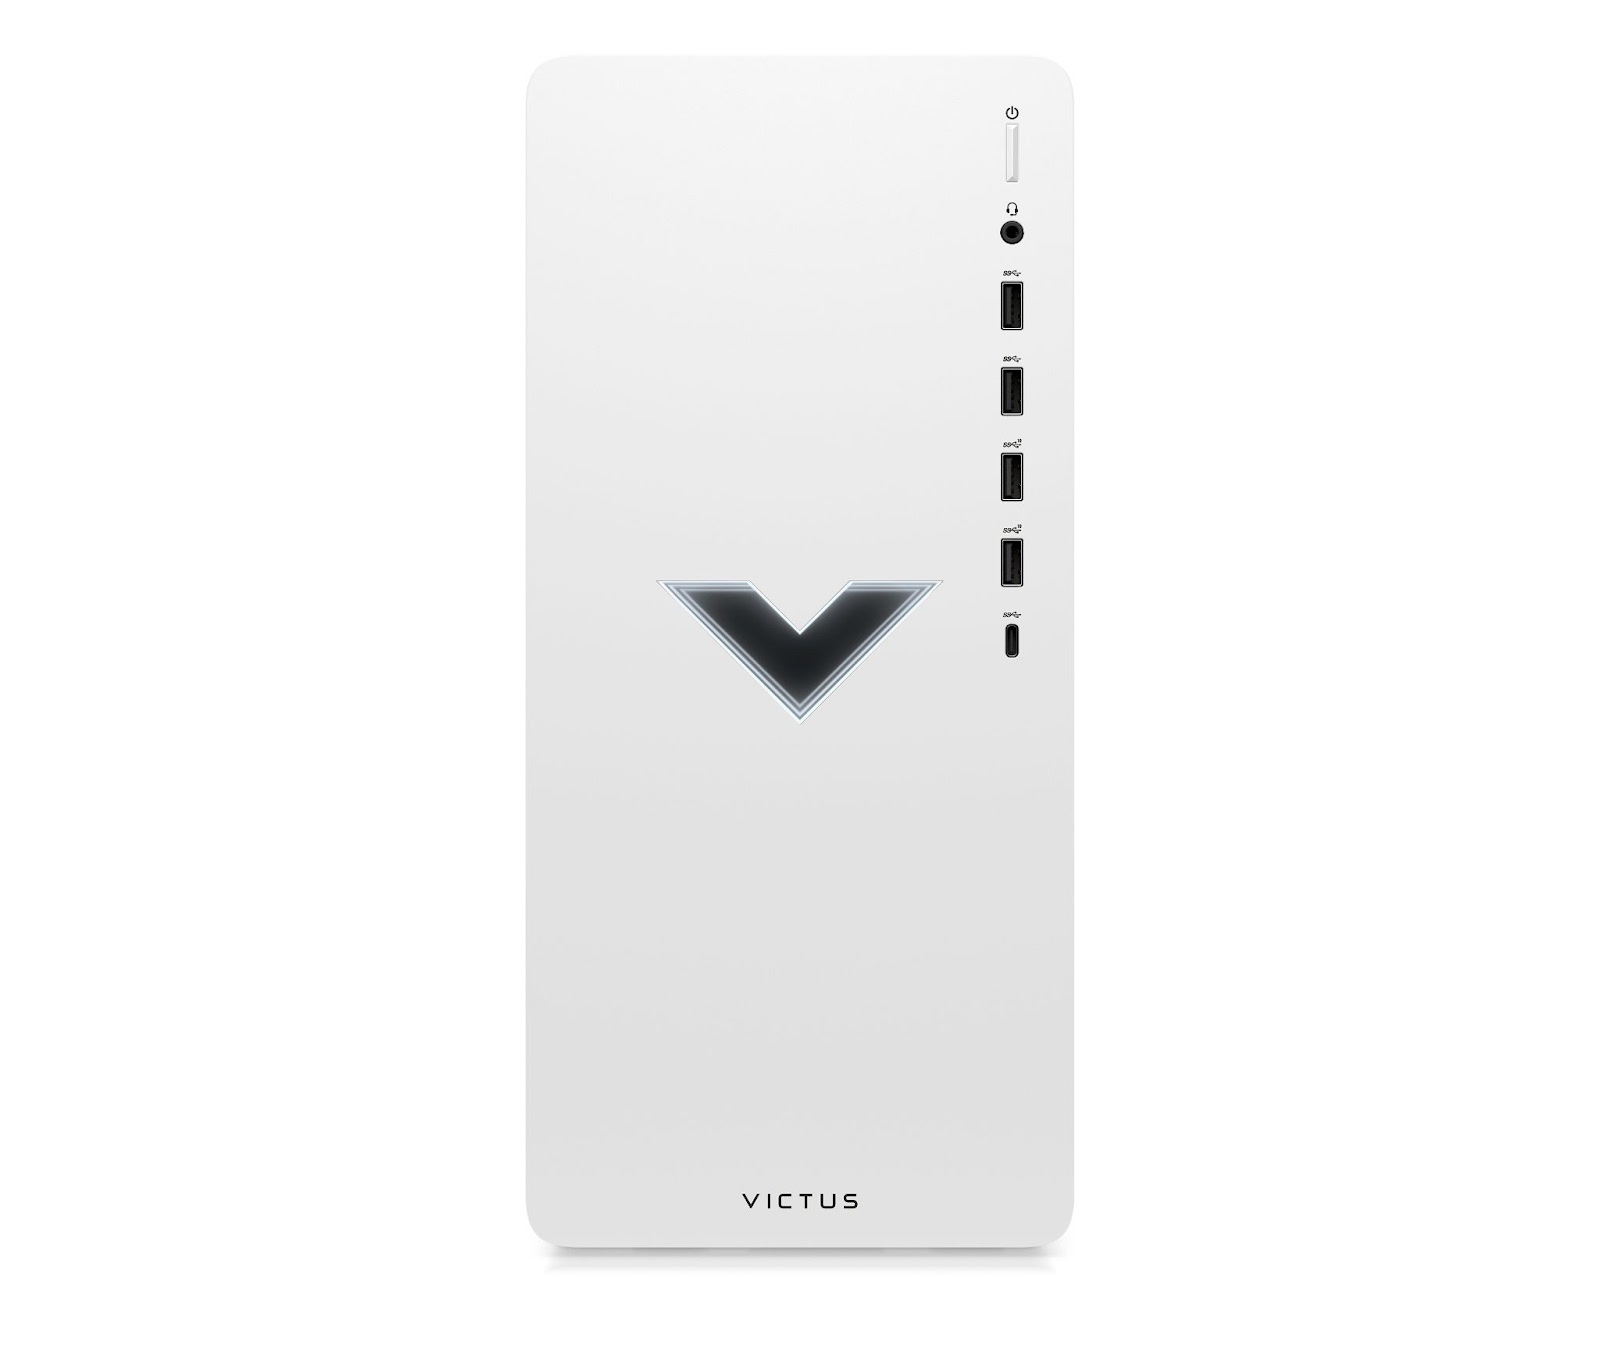 Victus 15L PC in white, front view with logo.